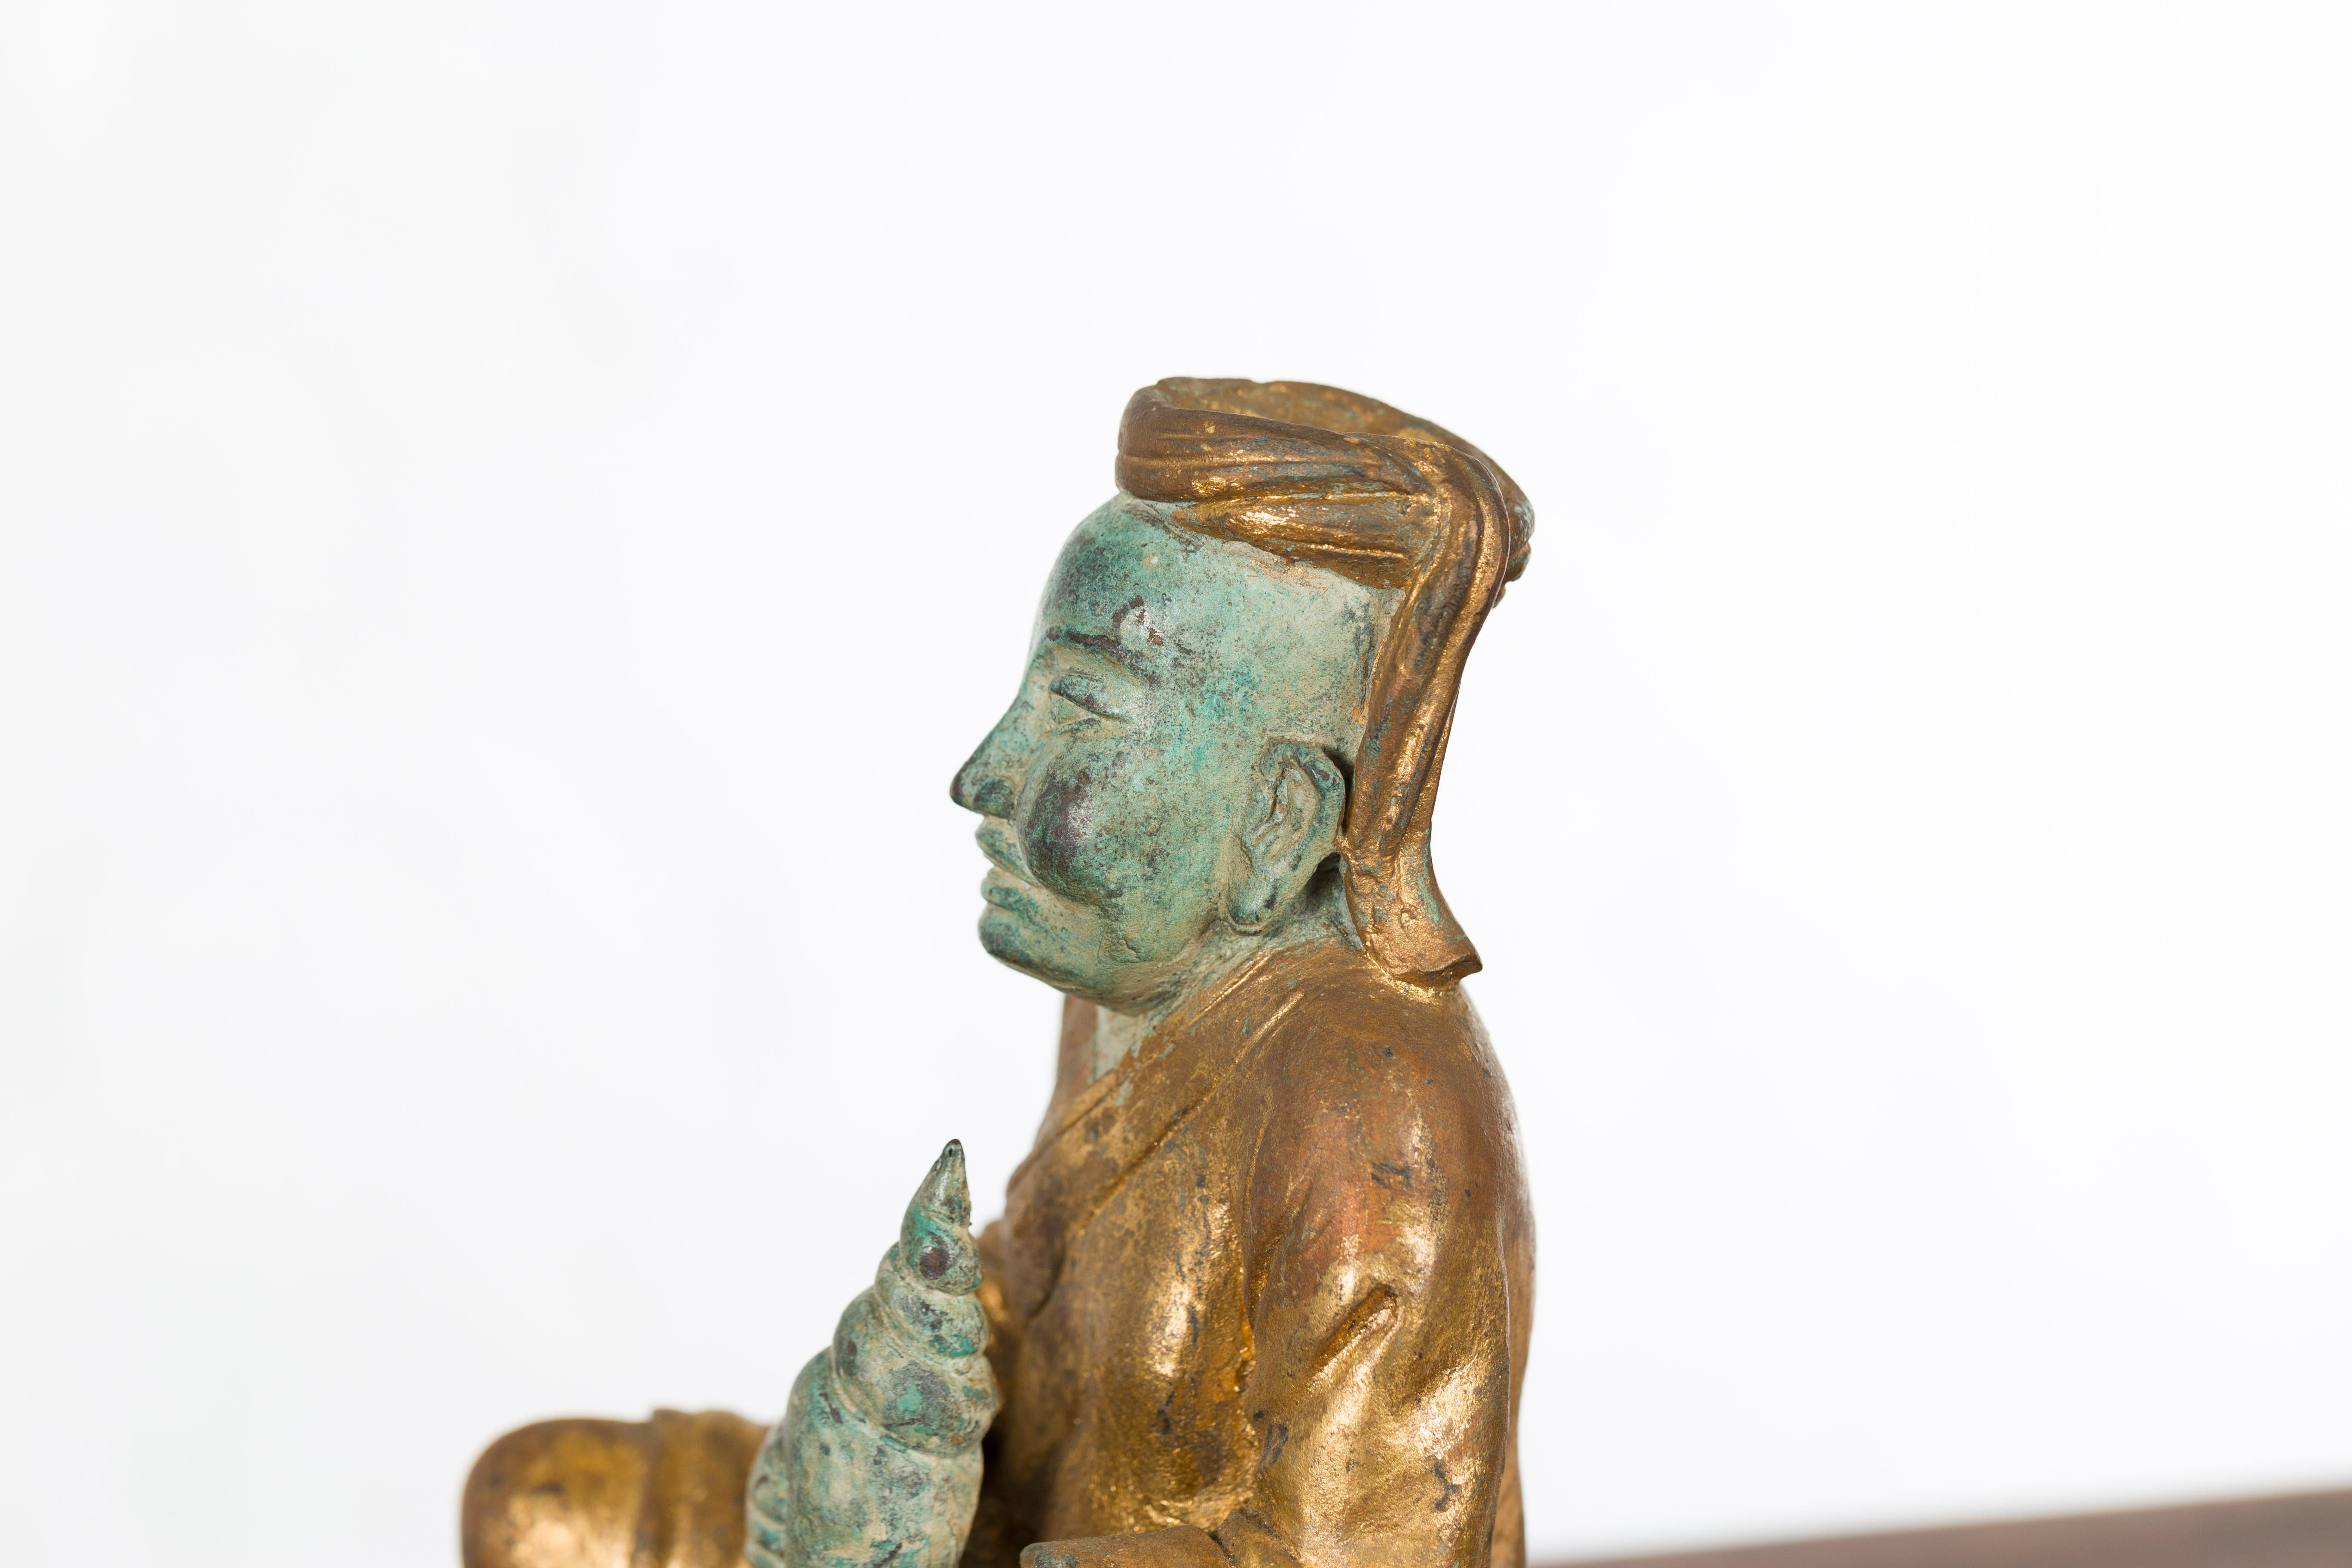 Petite Thai Verde and Gilded Statuette of a Seated Monk Holding a Conch Shell 5